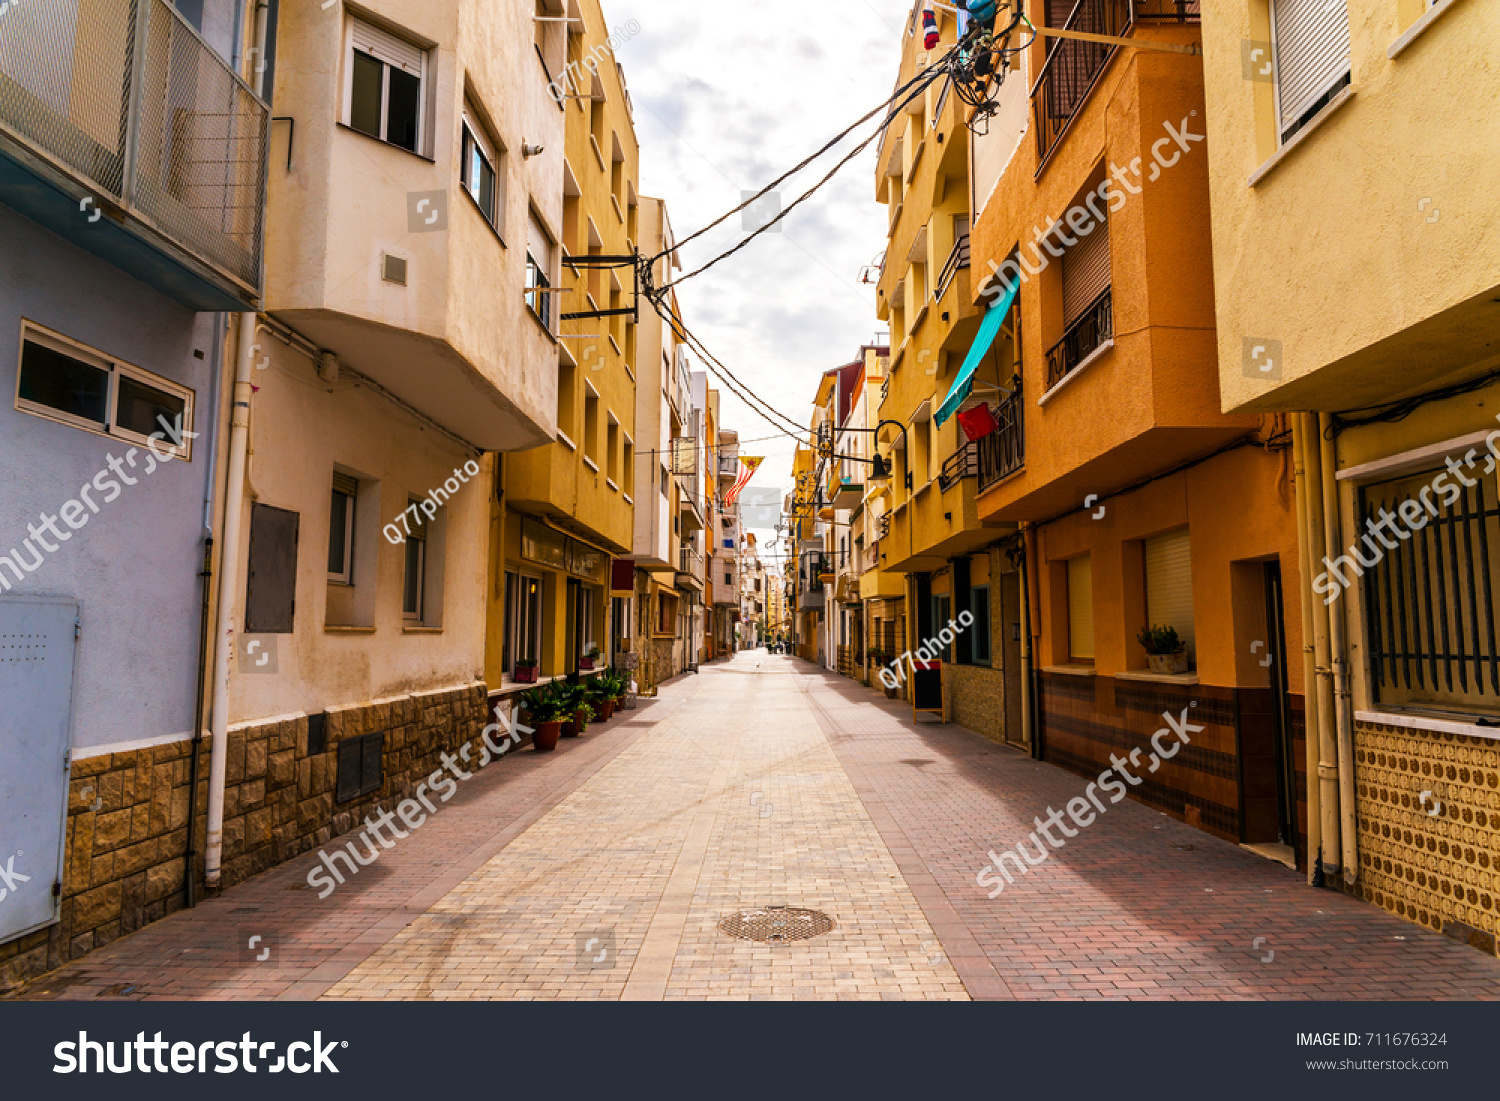 beautiful, picturesque street, narrow road, colorful facades of buildings, Spanish architecture, sunny day #711676324